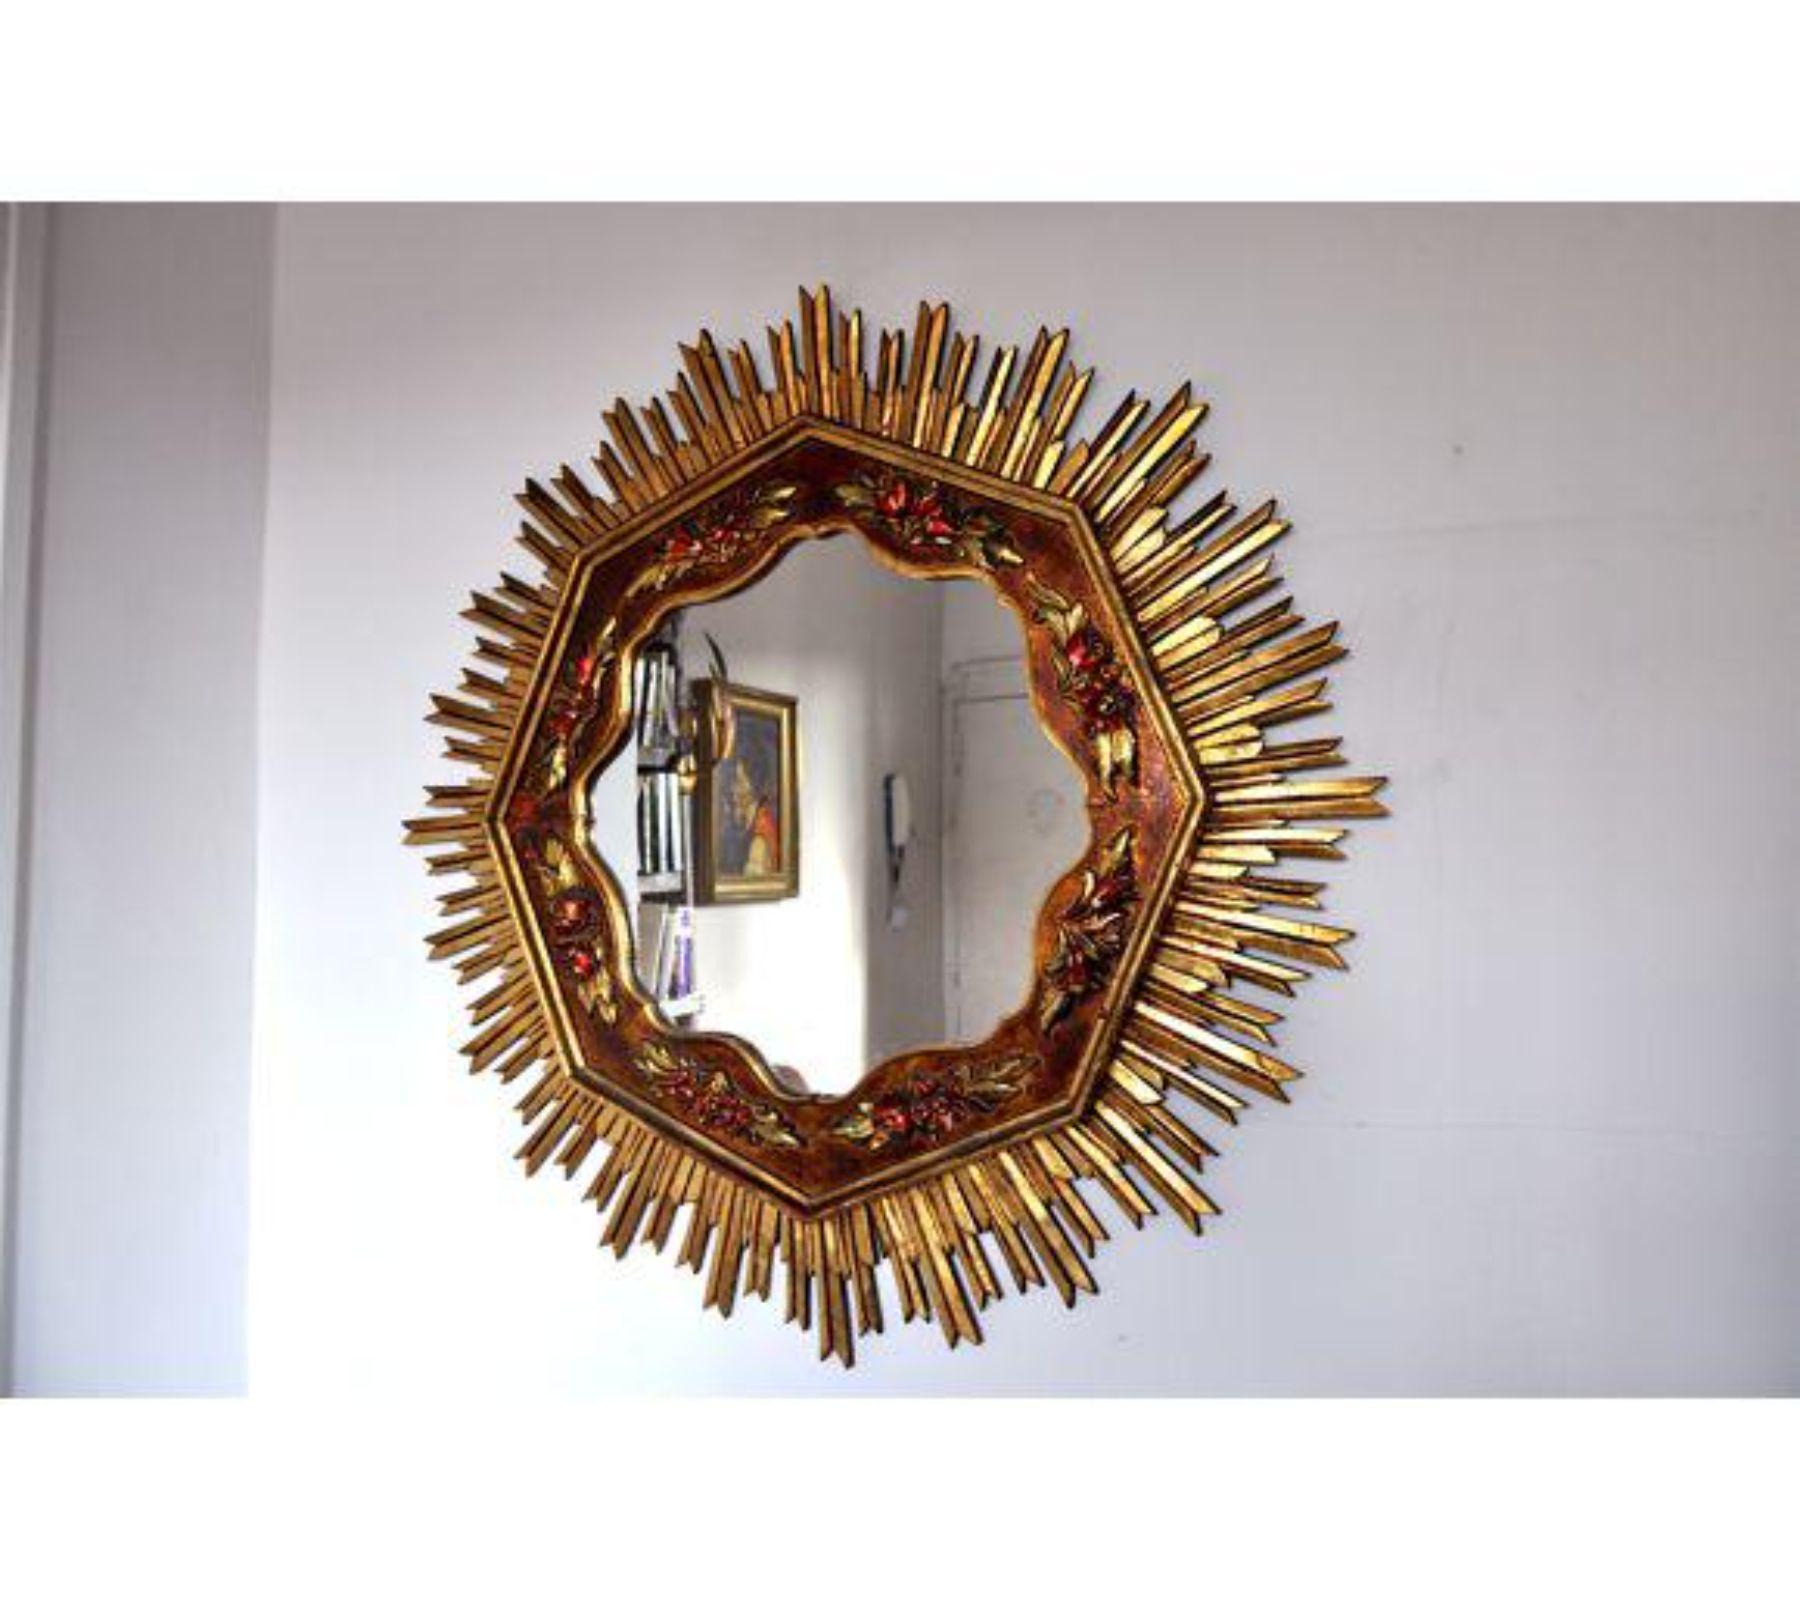 Large gold sunburst wodden mirror designed and hand crafter in France in 1960. Superb wood work with floral representation, unique by its size. A unique piece of design that will be great a highlight to your interior project. Object in mint